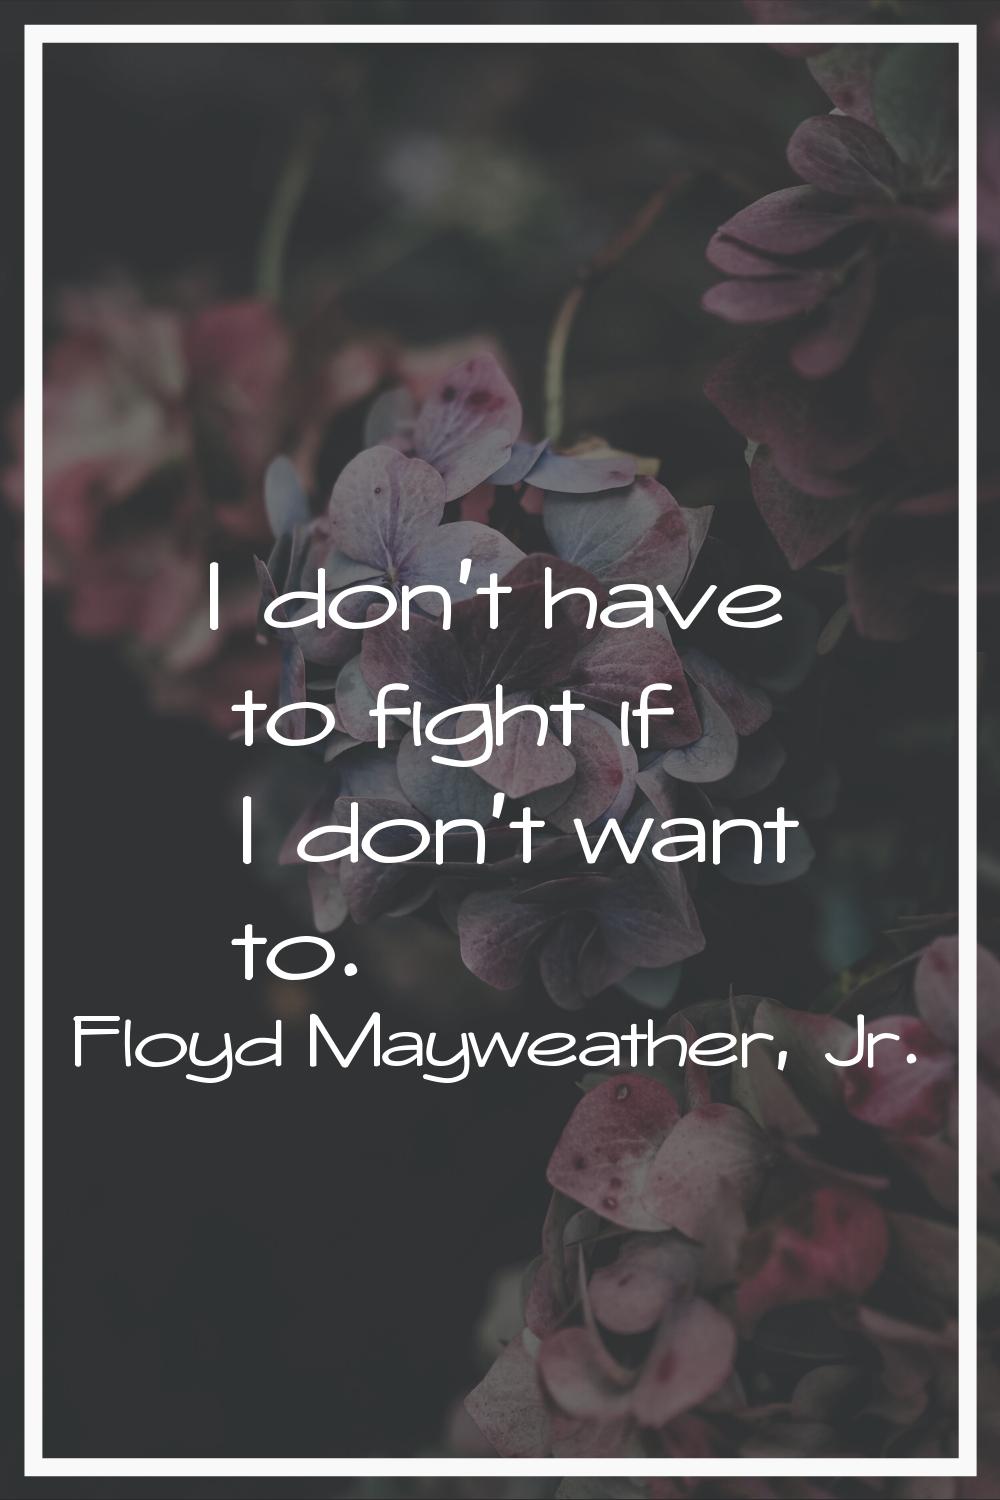 I don't have to fight if I don't want to.